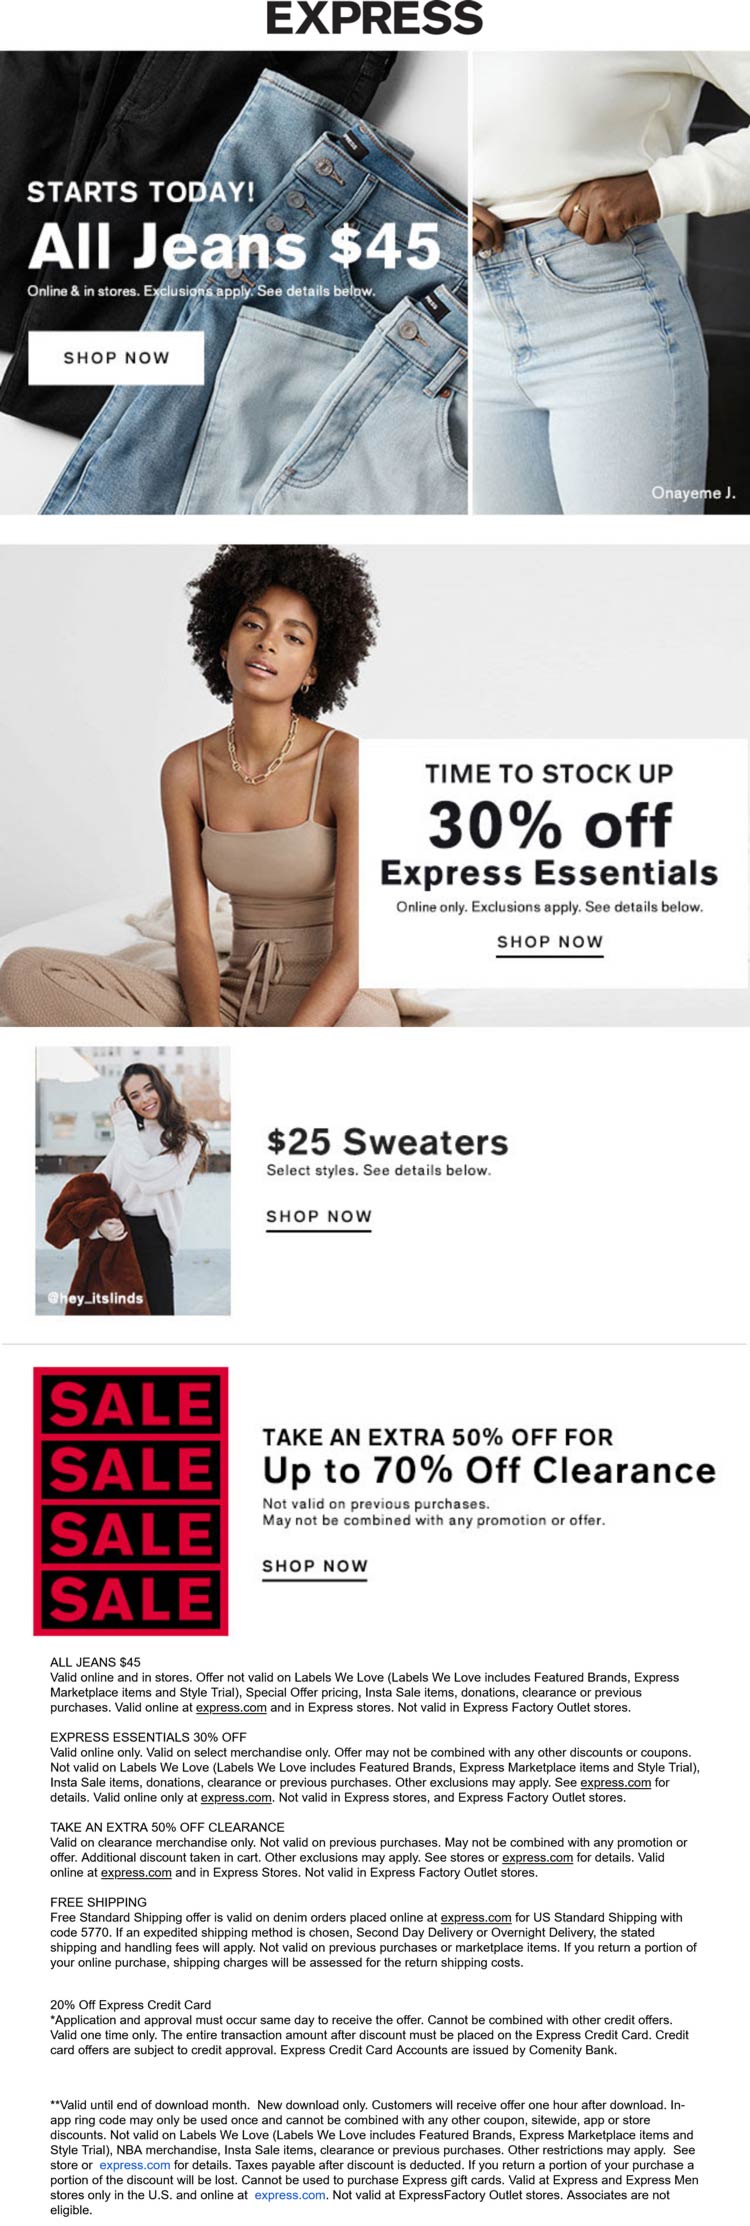 Express stores Coupon  30% off essentials & more at Express #express 